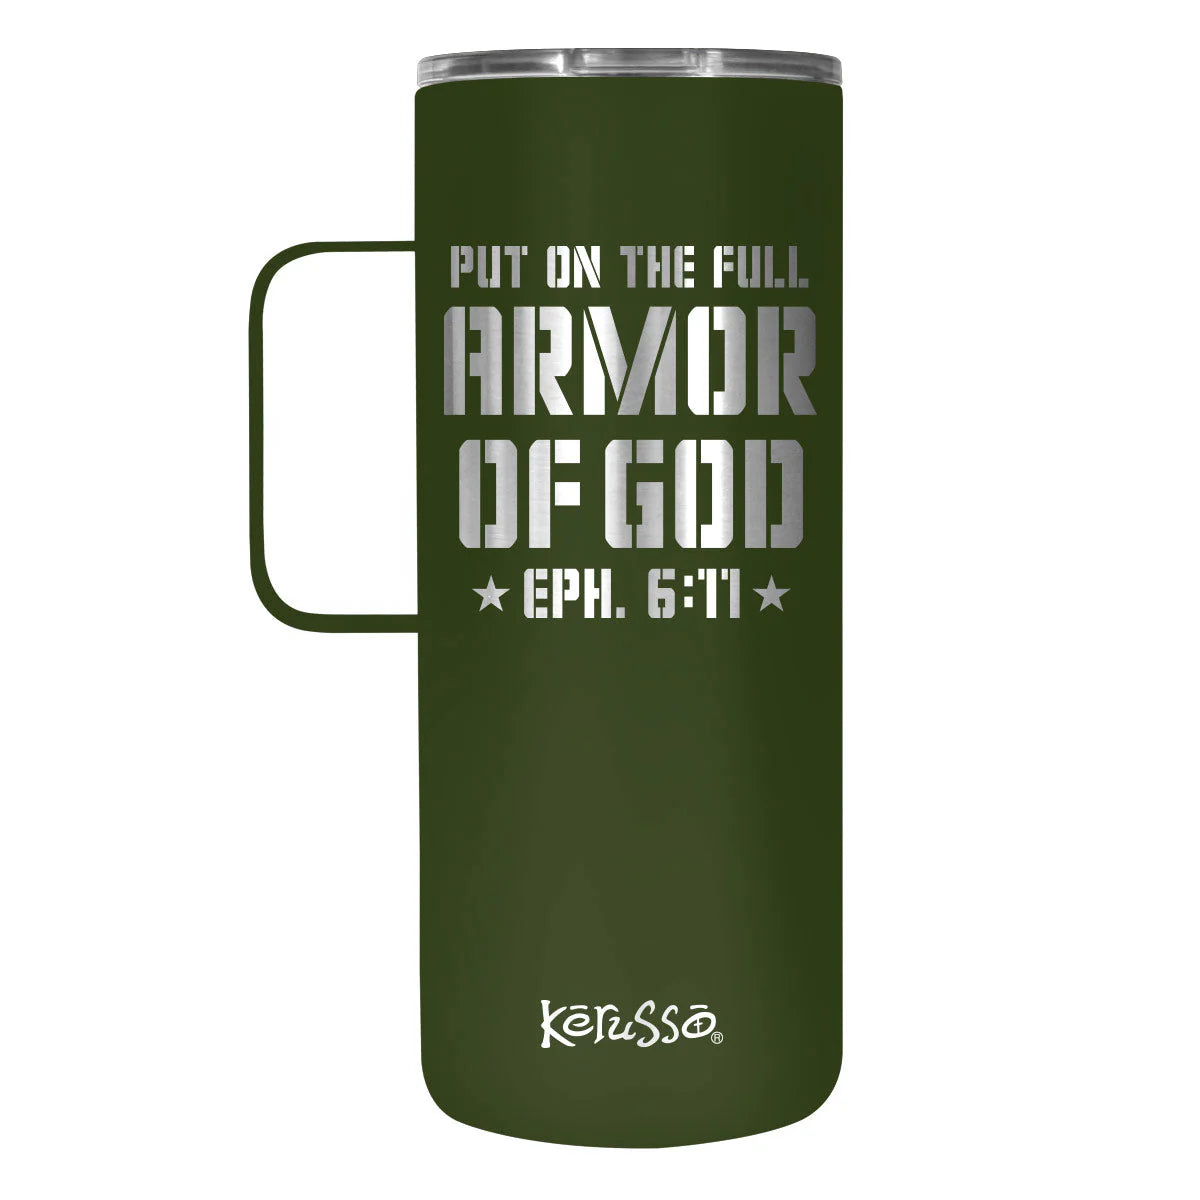 Kerusso 22 oz Stainless Steel Mug With Handle Armor Of God Kerusso® accessories Mens New Tumblers/Cups Women's